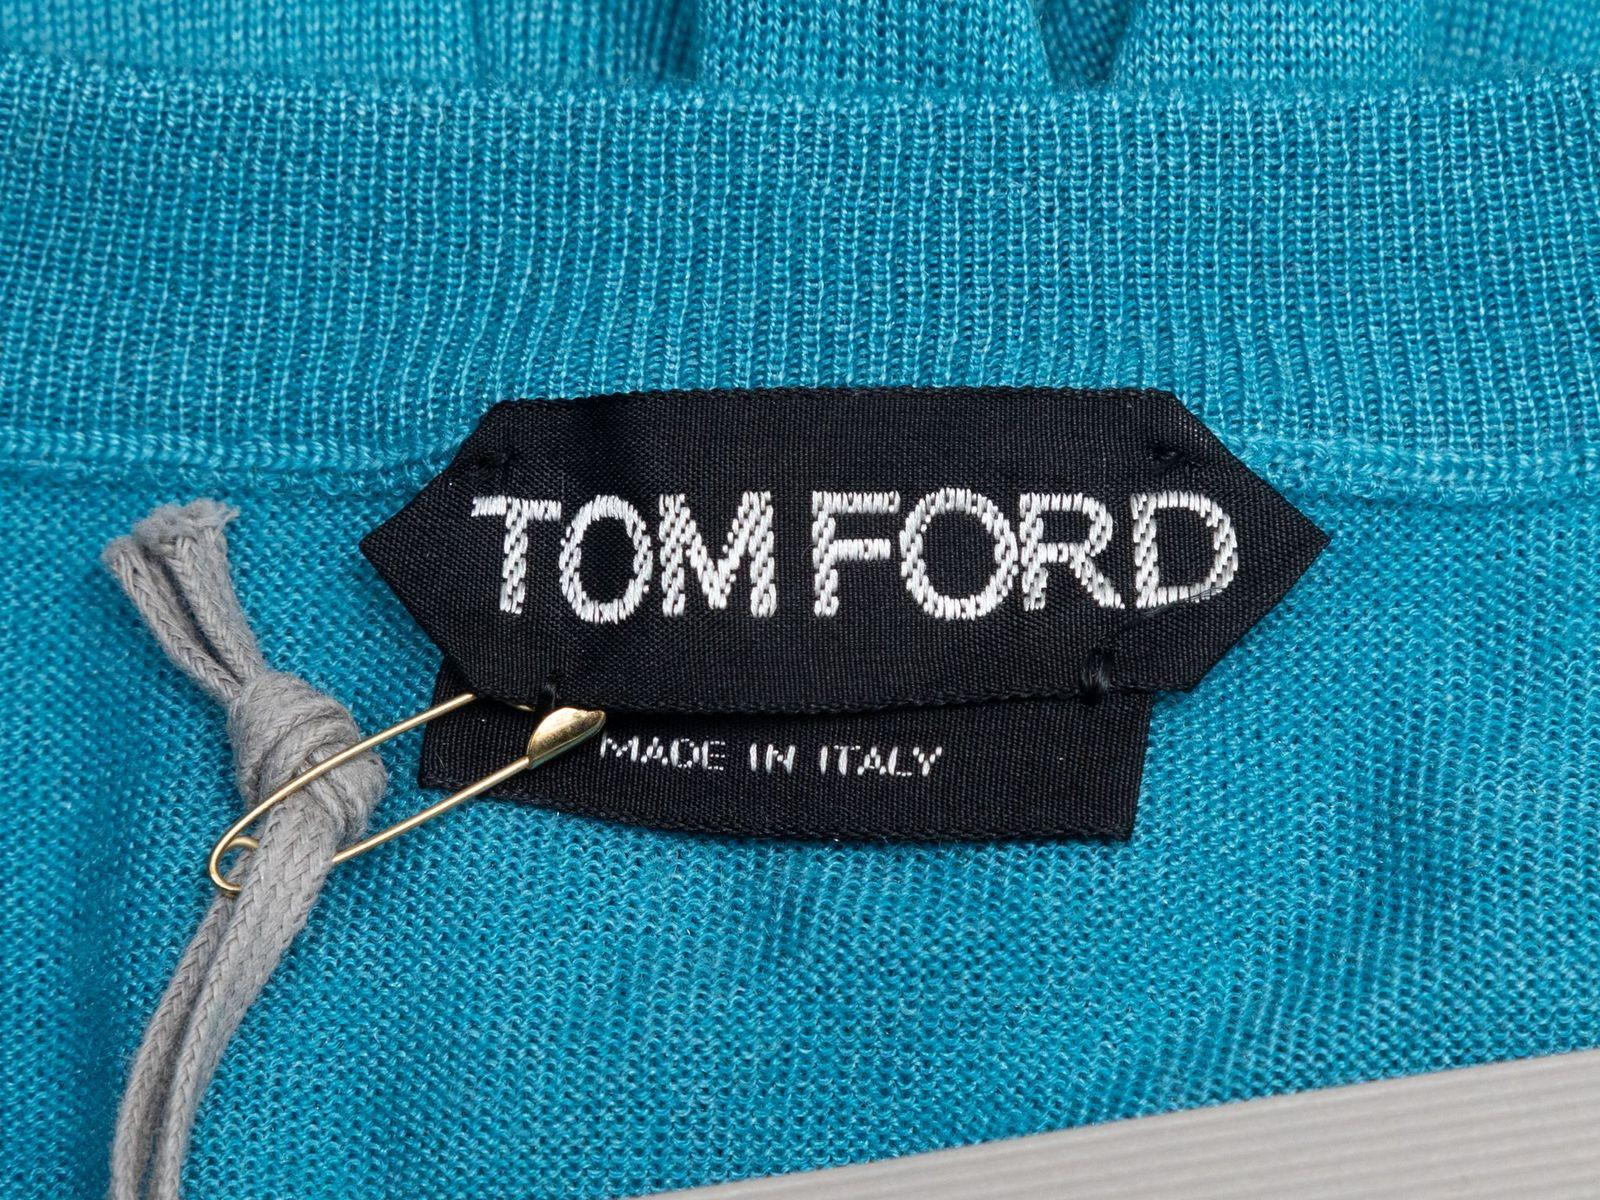 Product Details: Teal cashmere and silk-blend top by Tom Ford. Crew neck. Long sleeves. Button closures at bust. 38